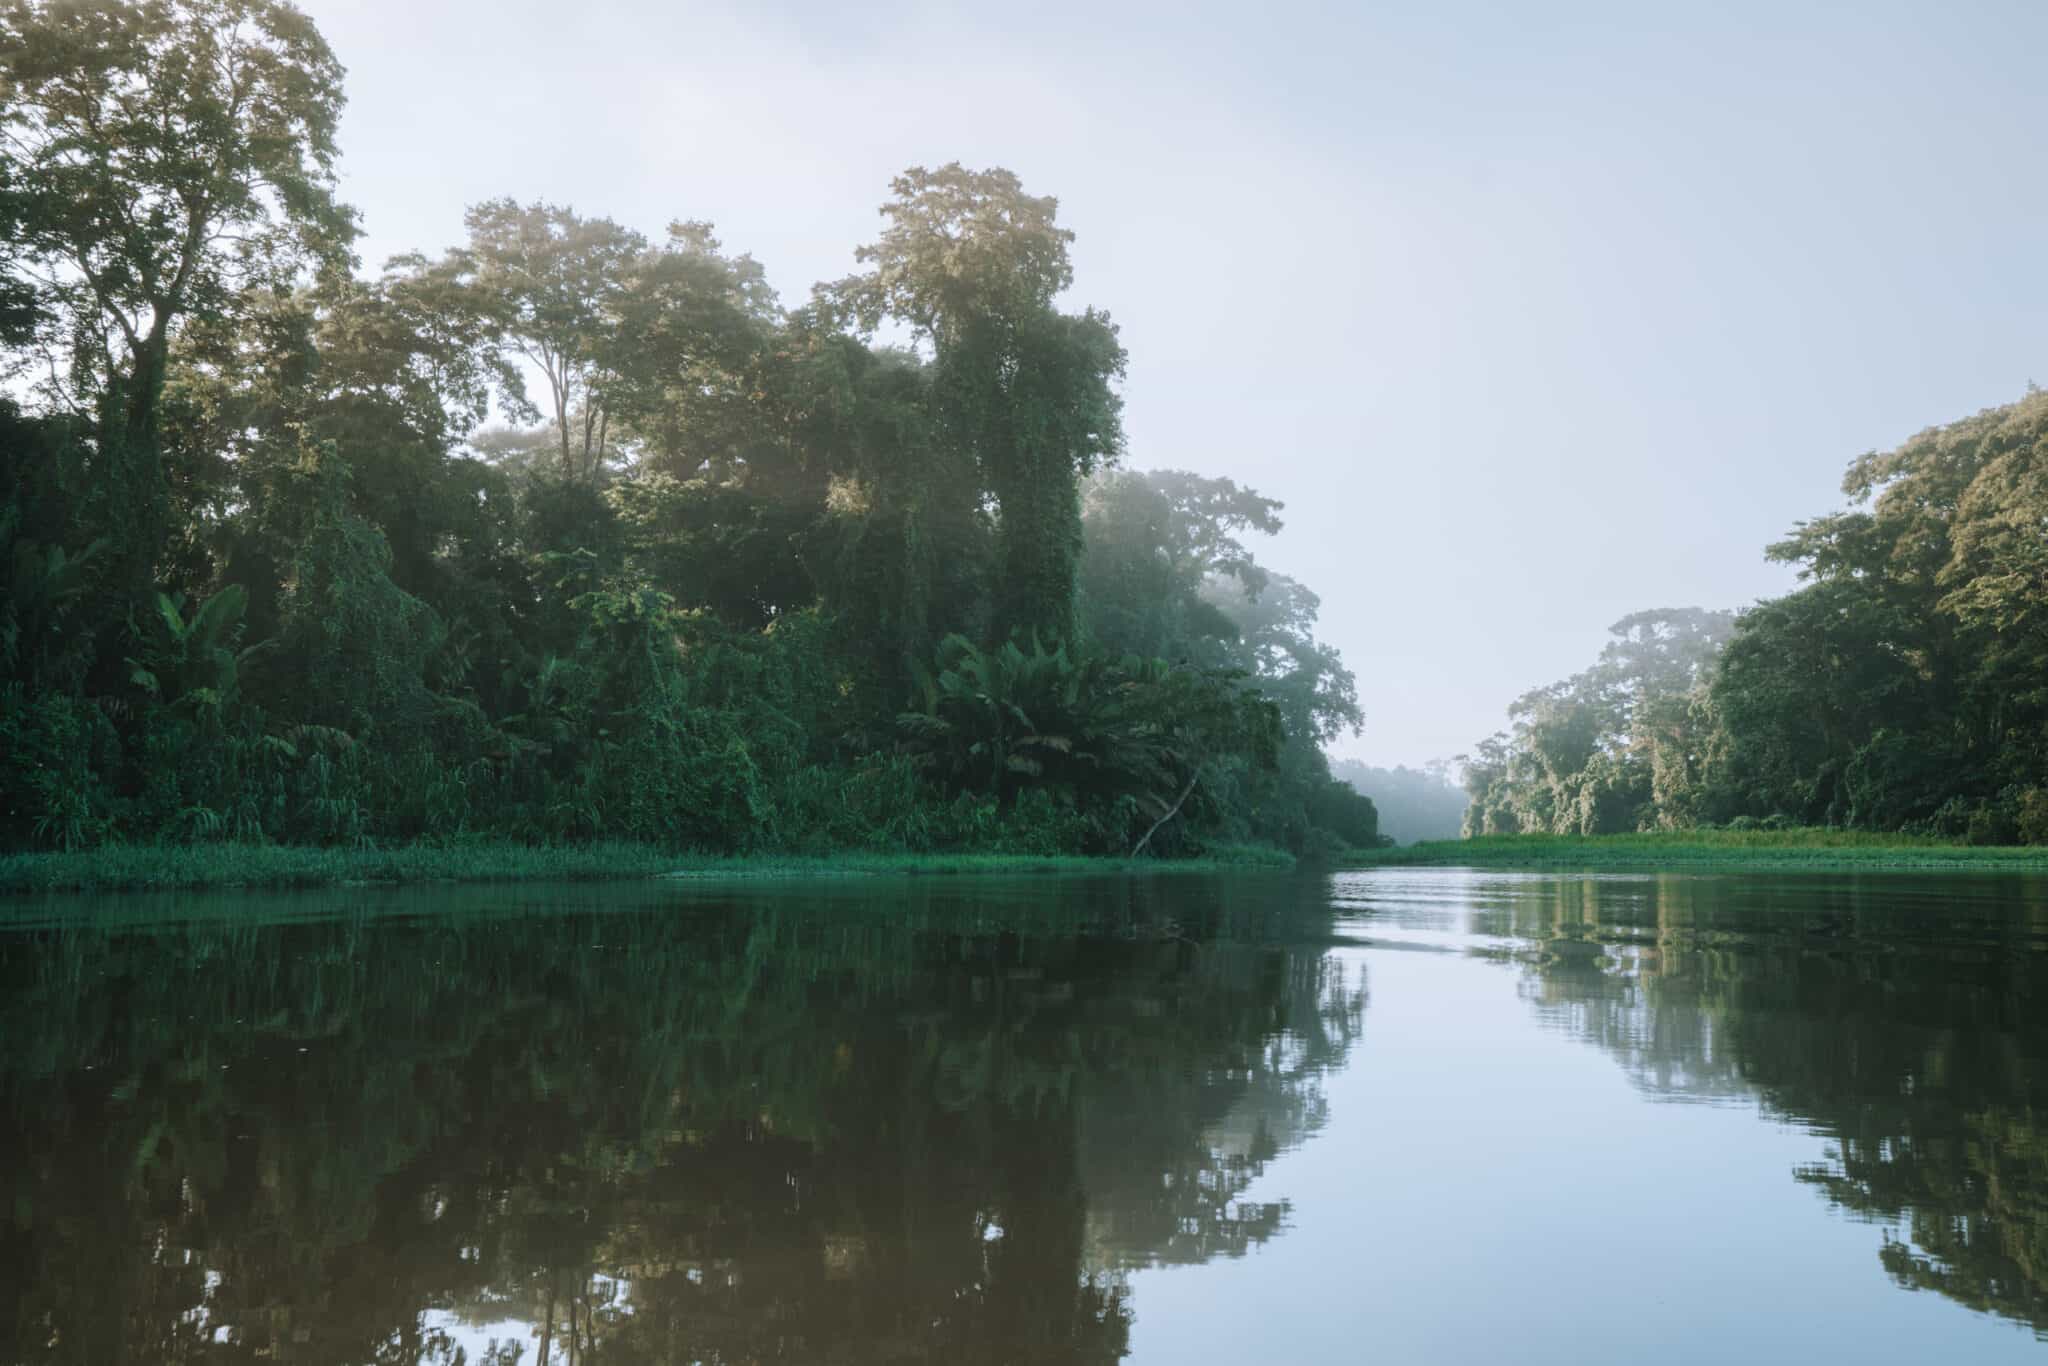 A river in Tortuguero, Costa Rica, embraced by lush green trees.